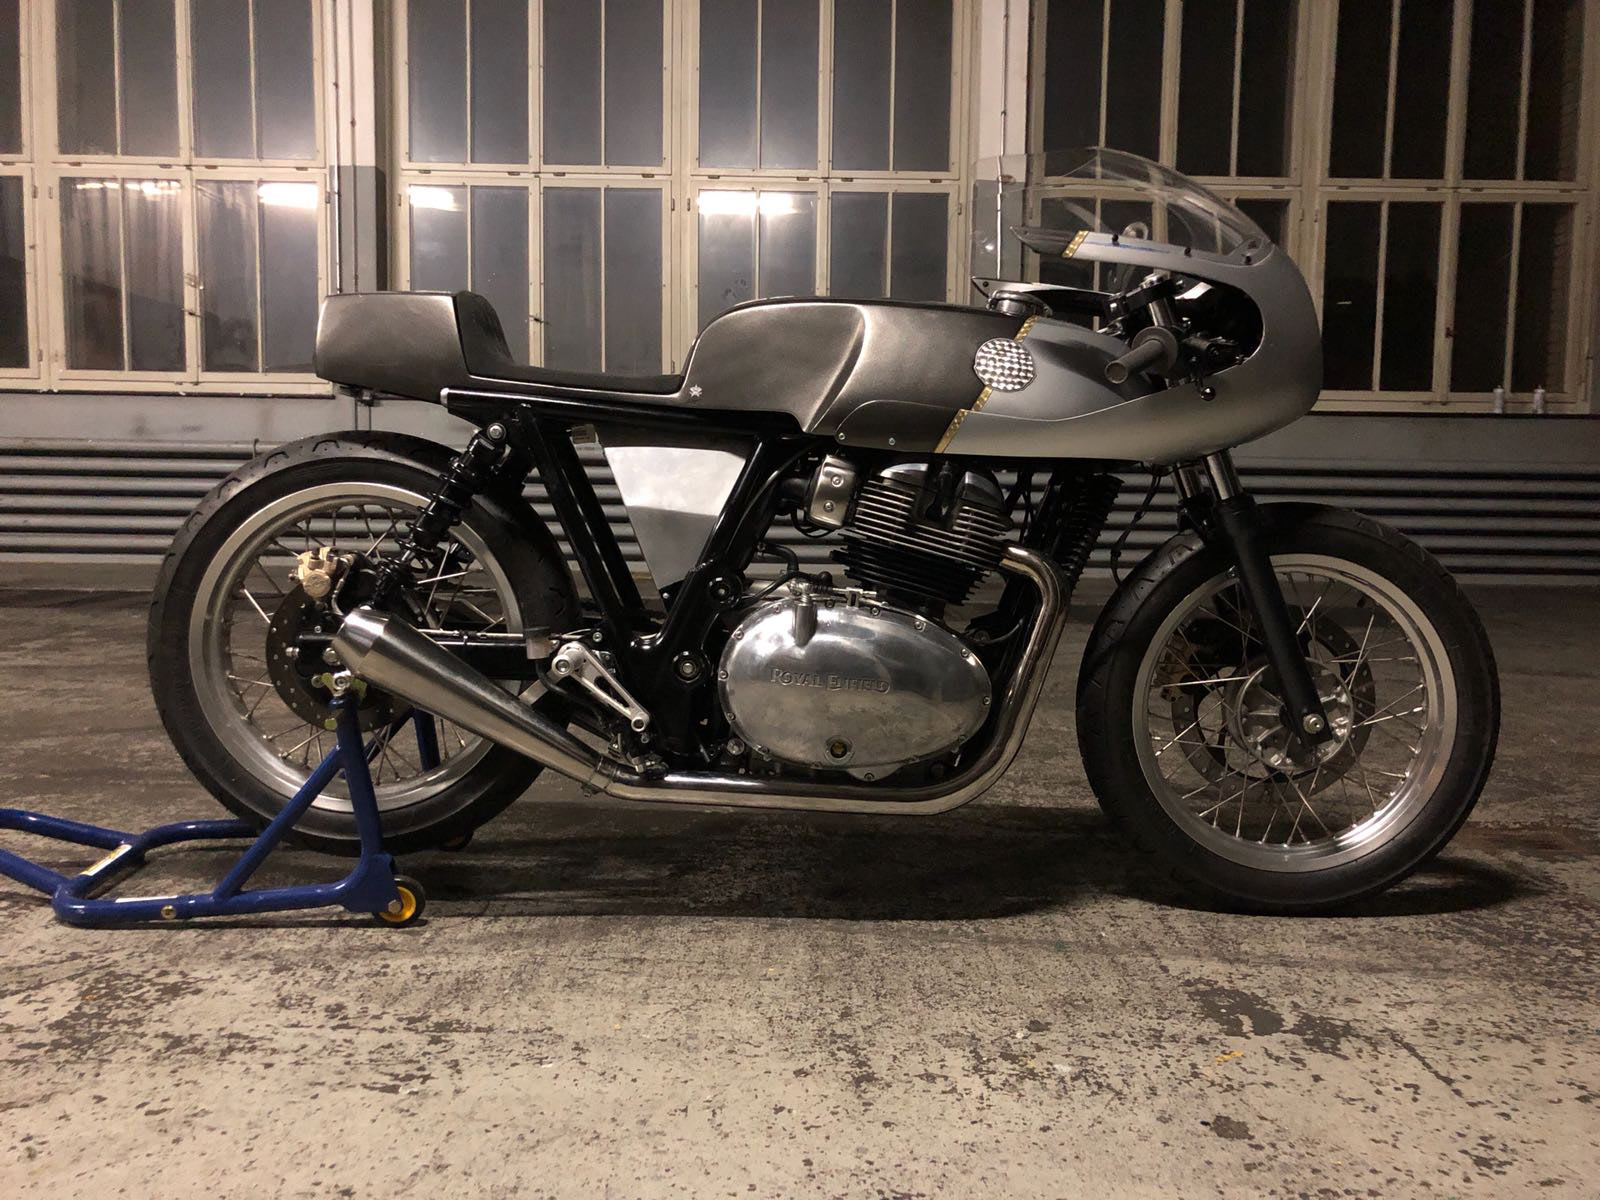 NEW SKIDS ON THE BLOCK. Young Guns' Royal Enfield 650 GT Racer ...